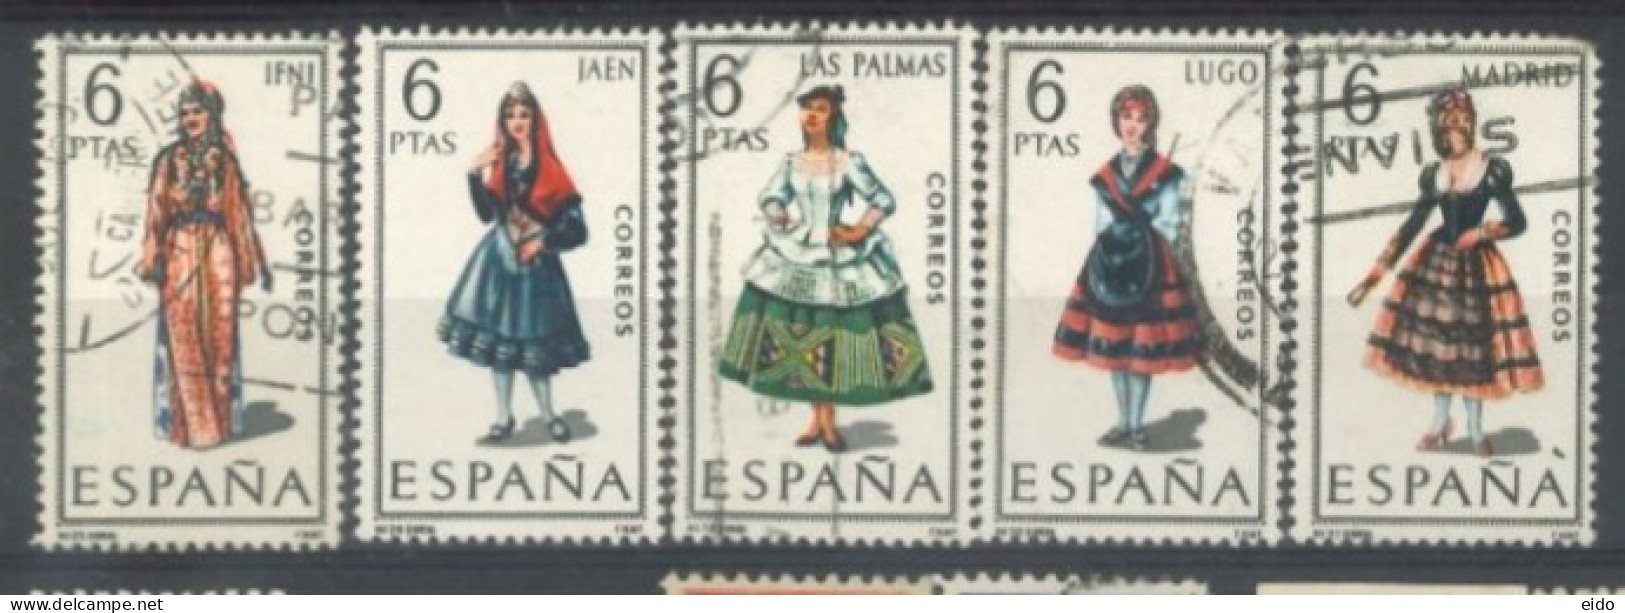 SPAIN, 1969, REGIONAL COSTUMES STAMPS SET OF 5, # 1416/17,1421/22/34, &1437, USED. - Oblitérés